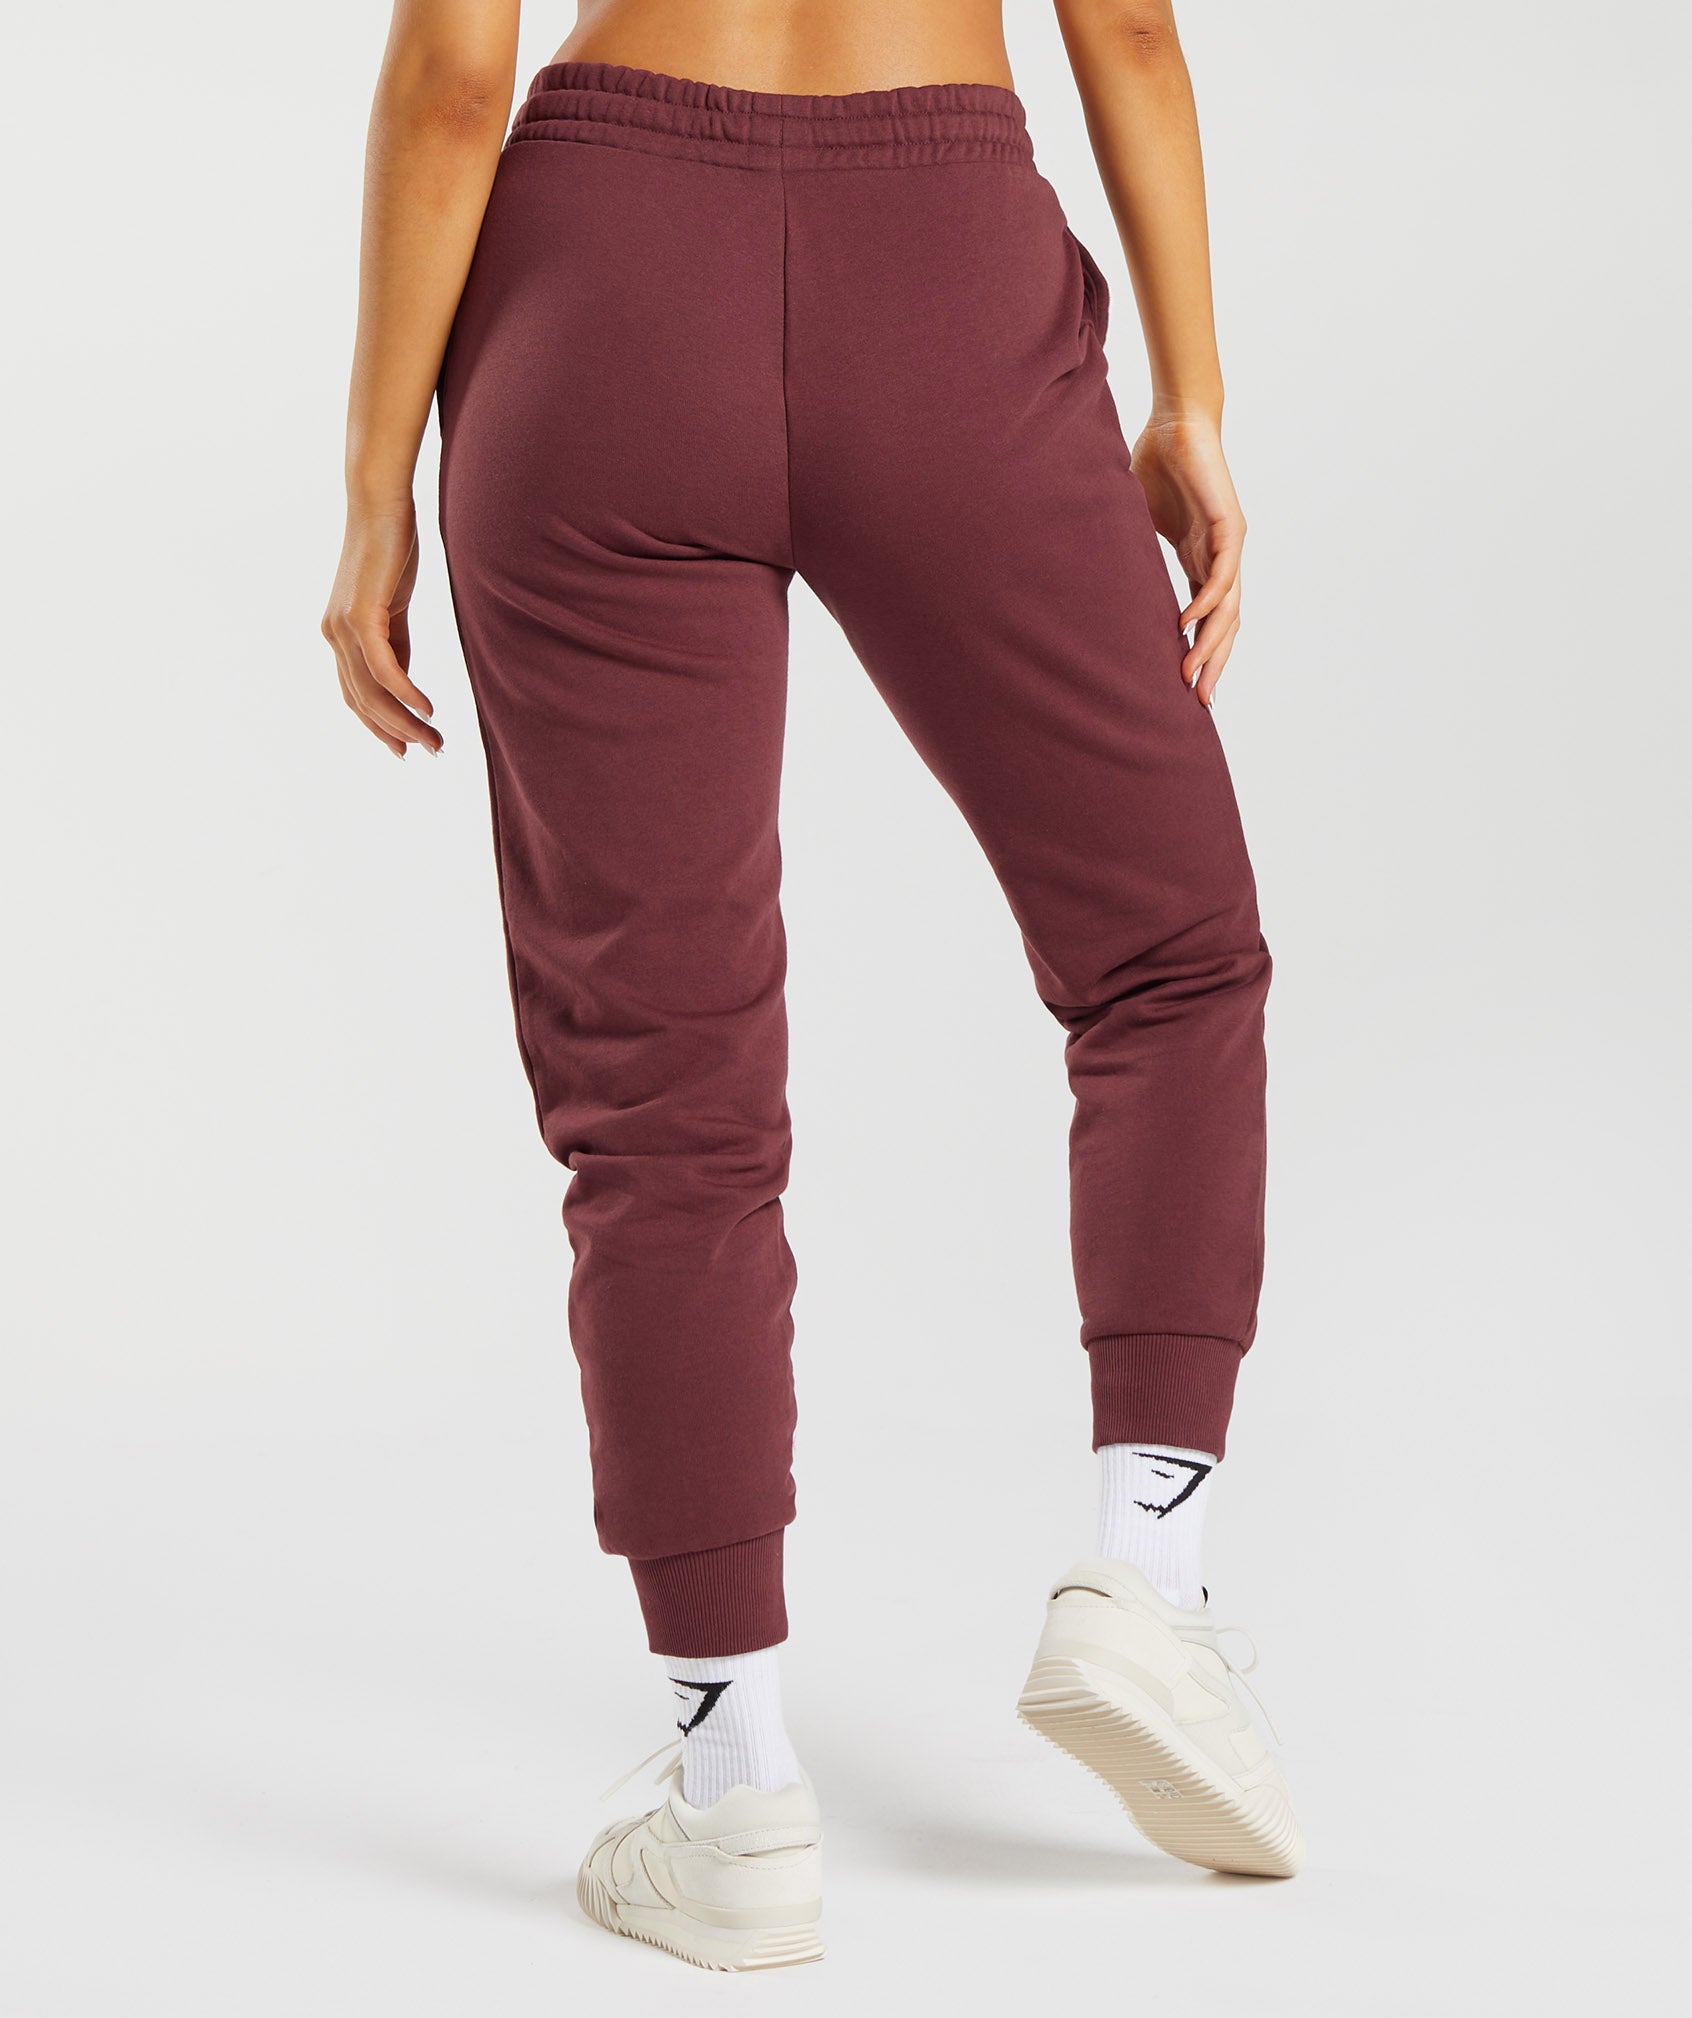 Social Club Joggers in Cherry Brown